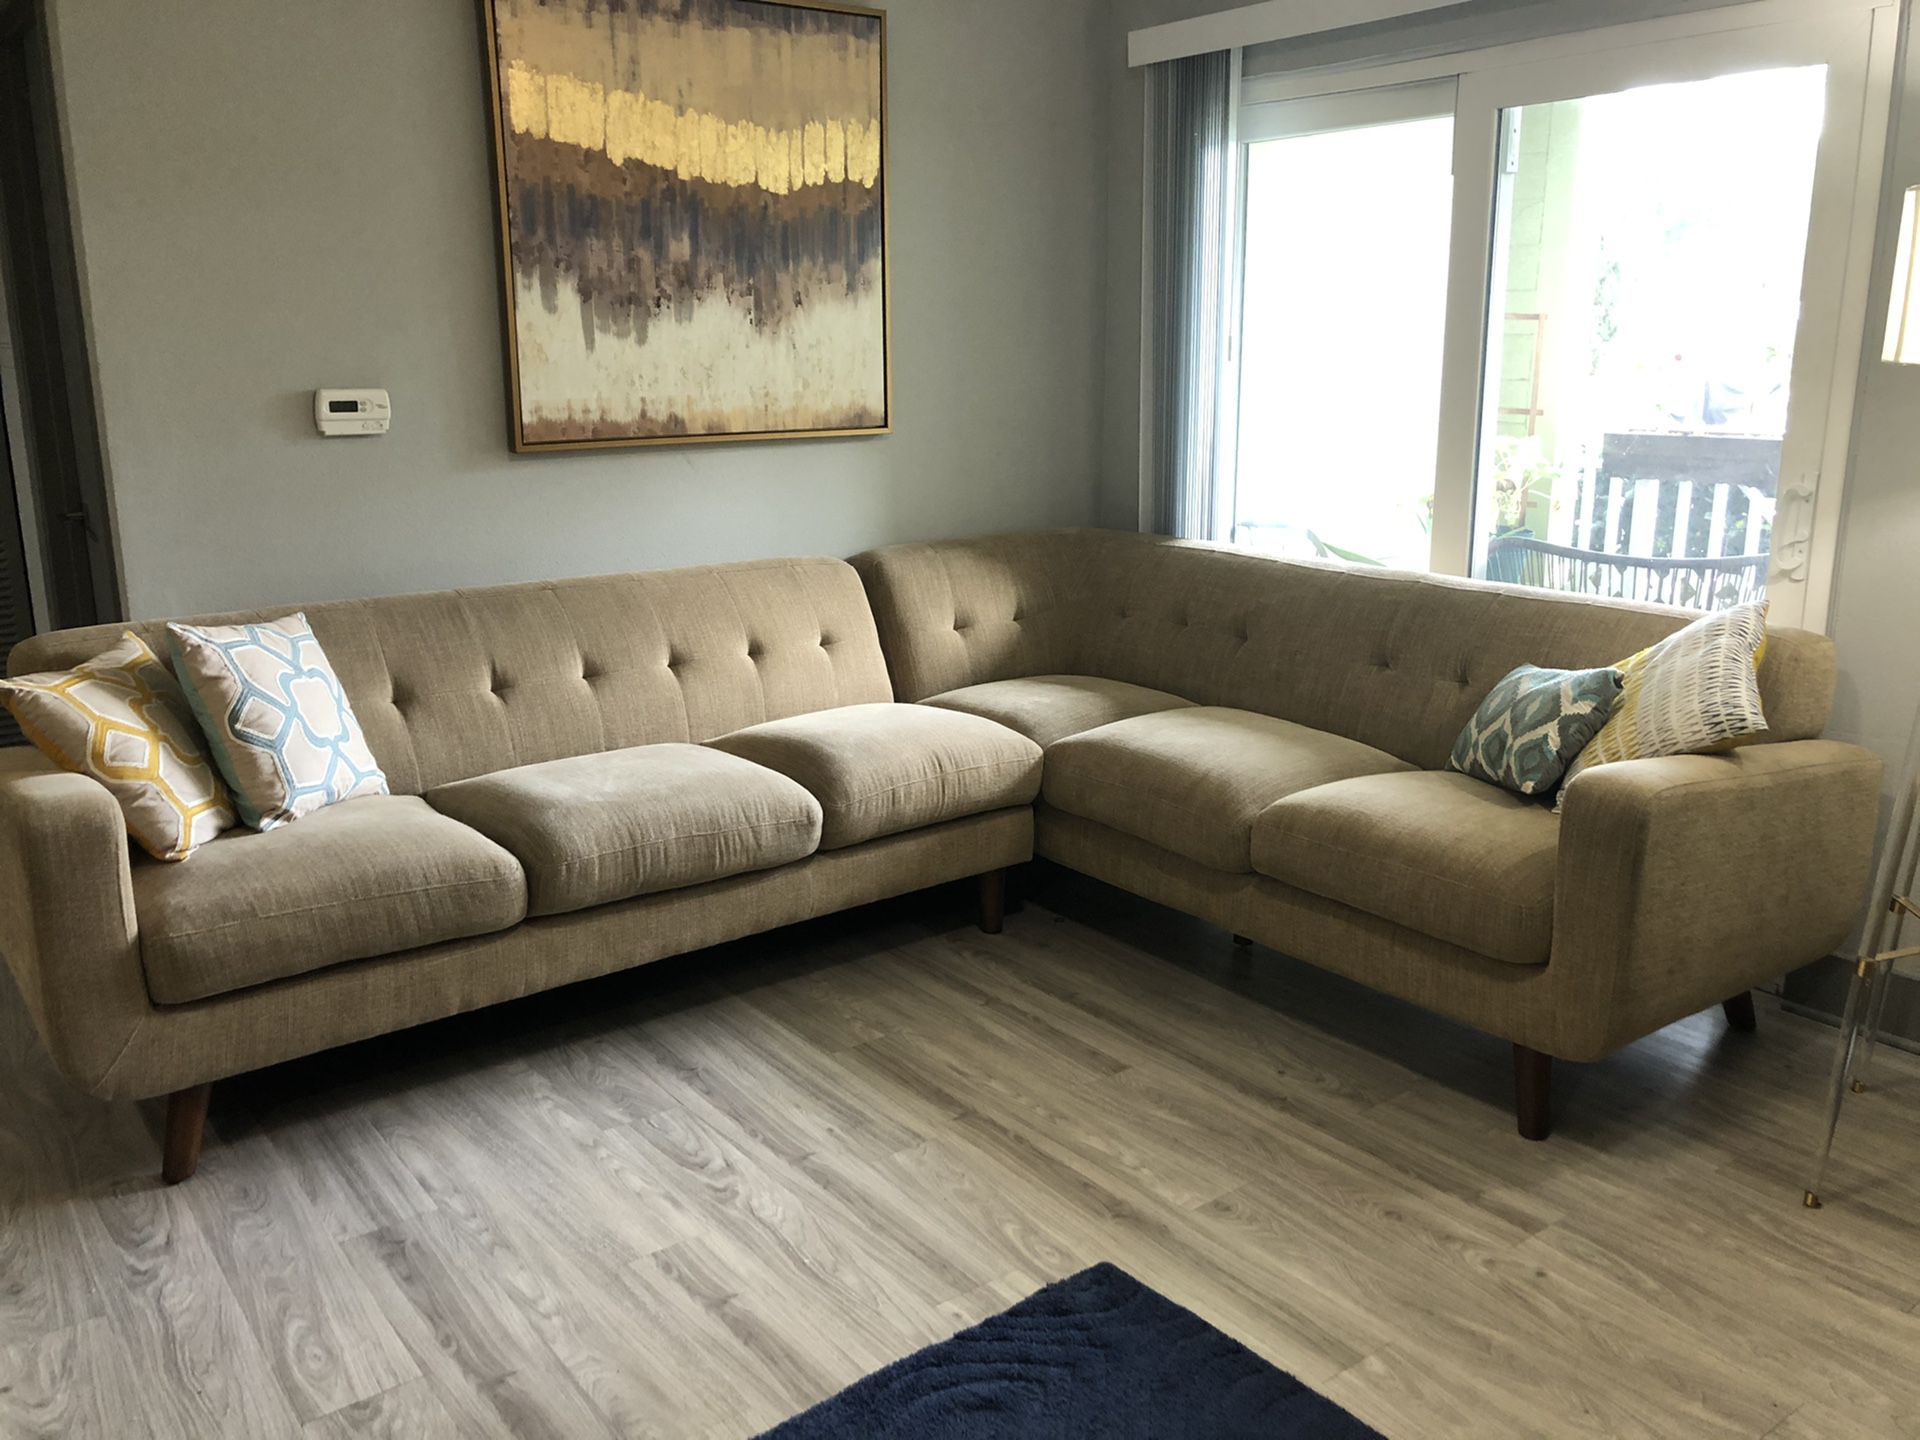 LIKE NEW MID-CENTURY MODERN SECTIONAL